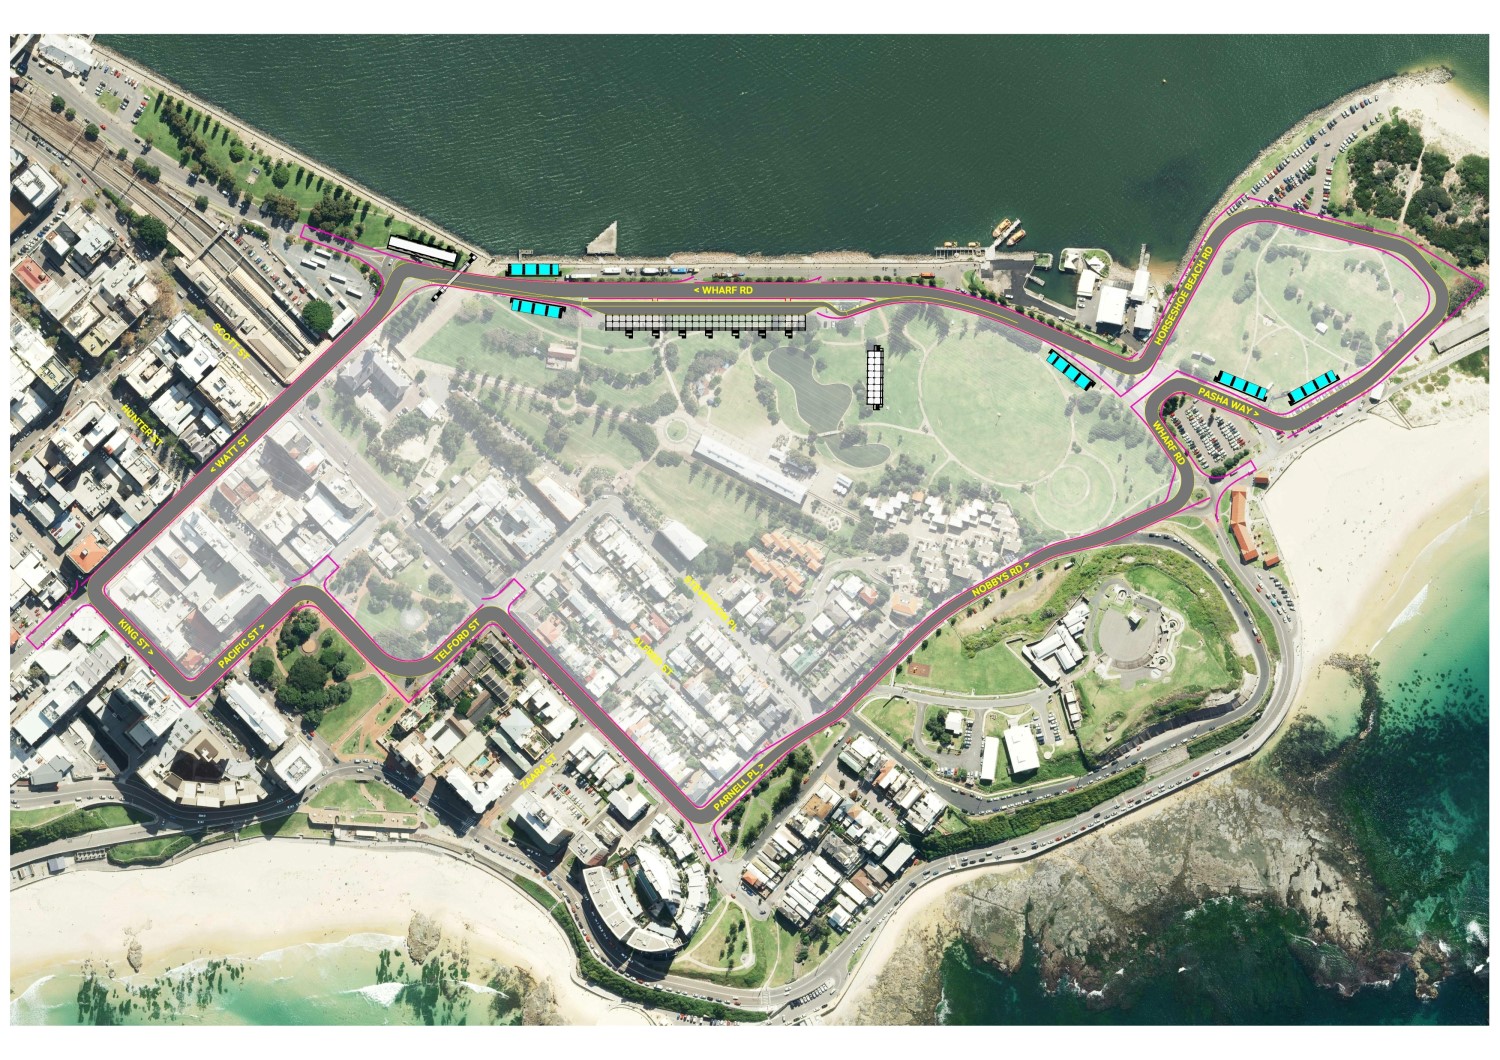 The Newcastle Street Circuit will travel along Wharf Road, and past the iconic Nobby's Beach.